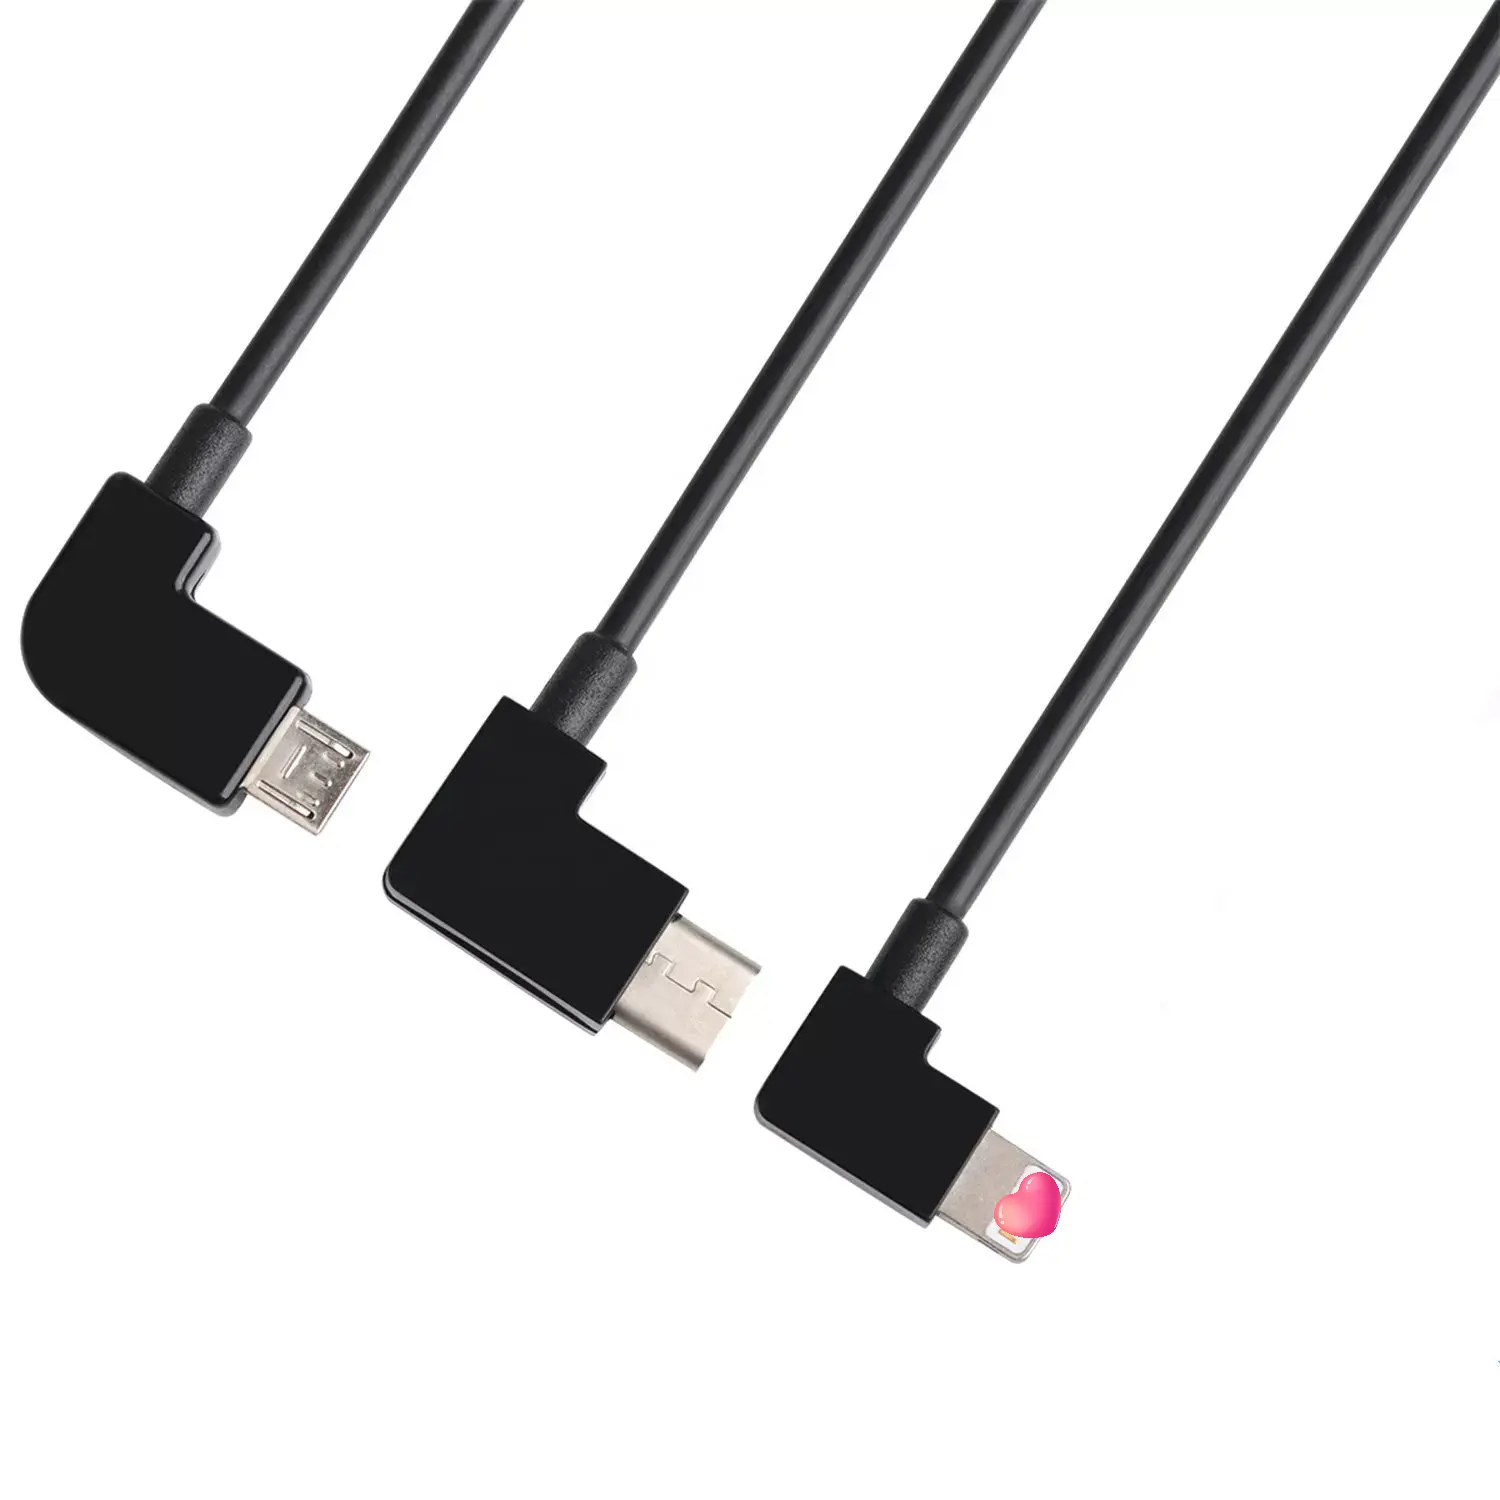 Drone Right Angled USB cable set 3 cables Micro to L ,Micro to Type C ,Micro to Micro